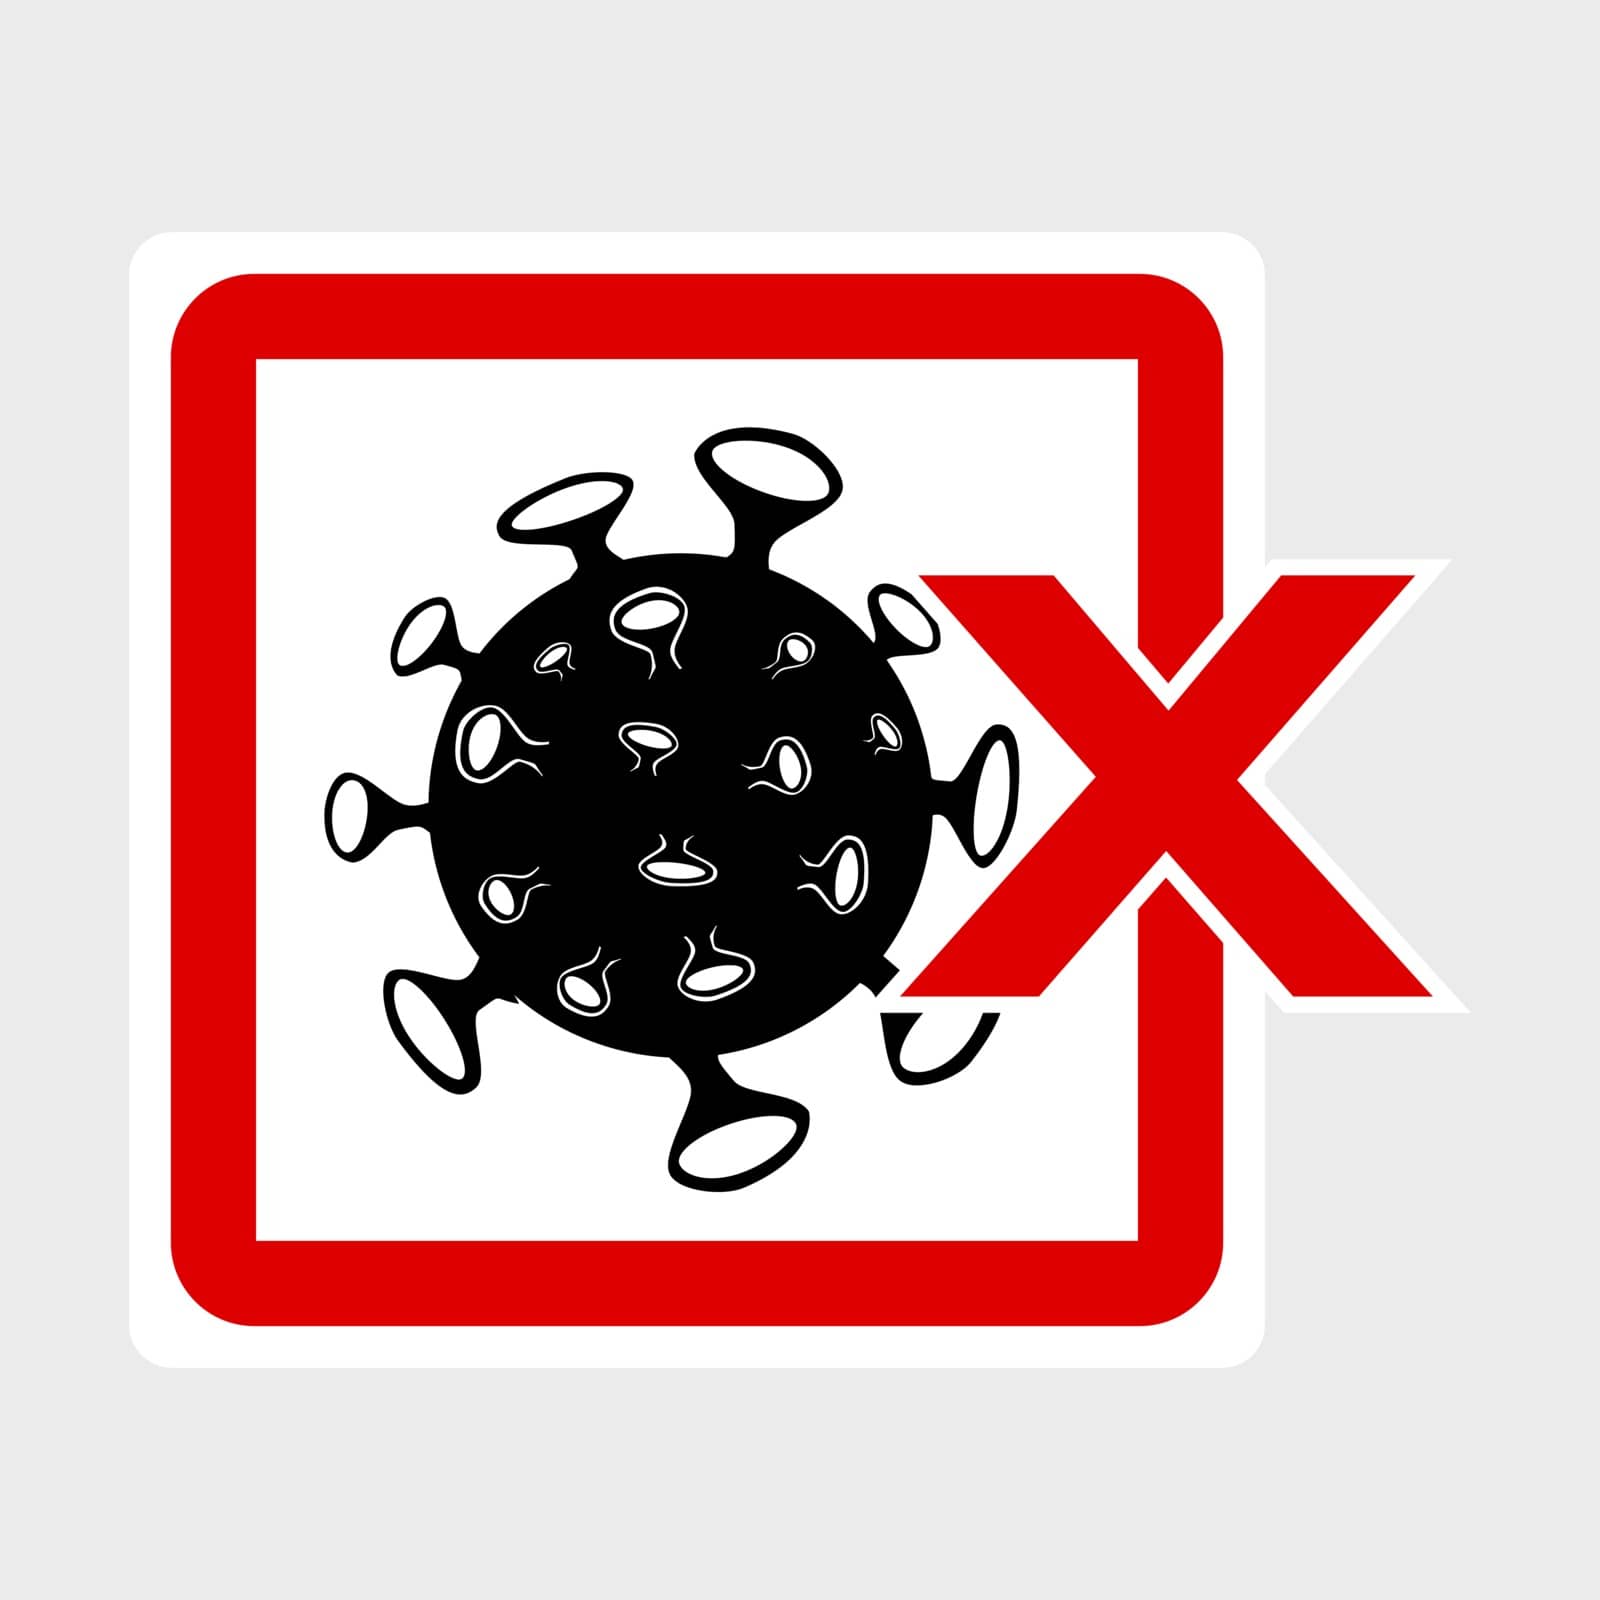 Simple Cutting Sticker, Vector Warning, Prohibited Sign, Virus, including Covid-19 by om_yos